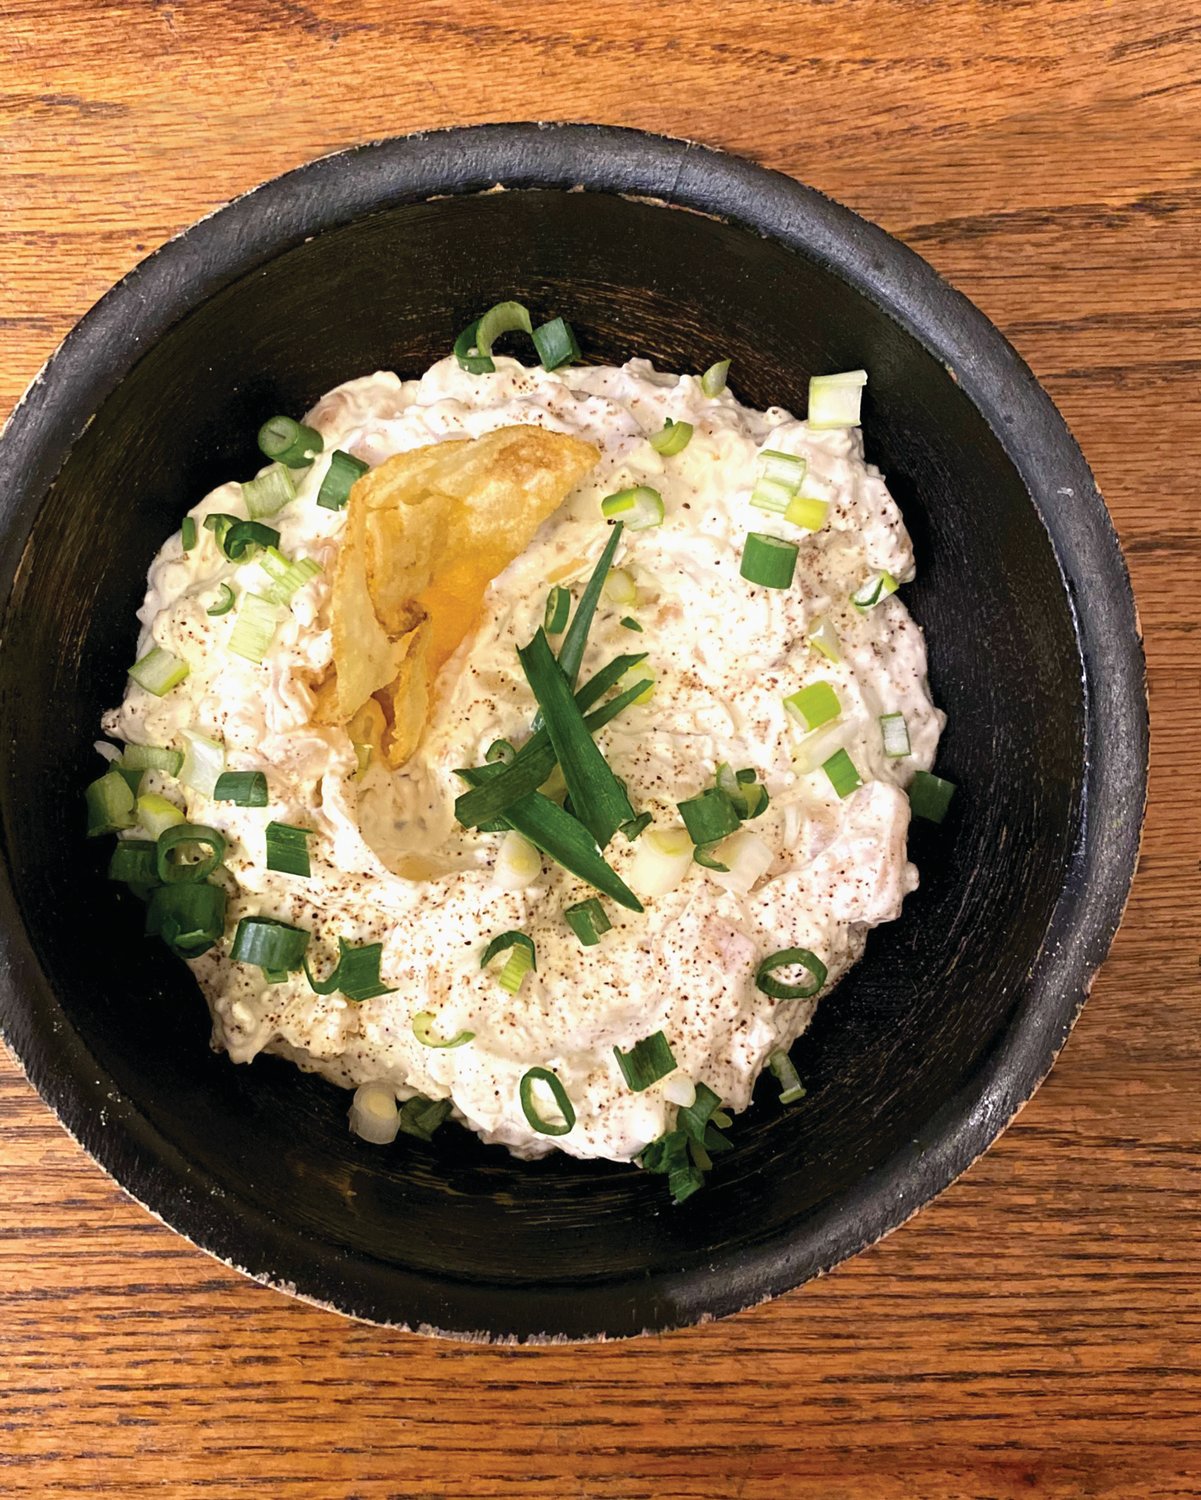 A simple onion dip can be made at home.